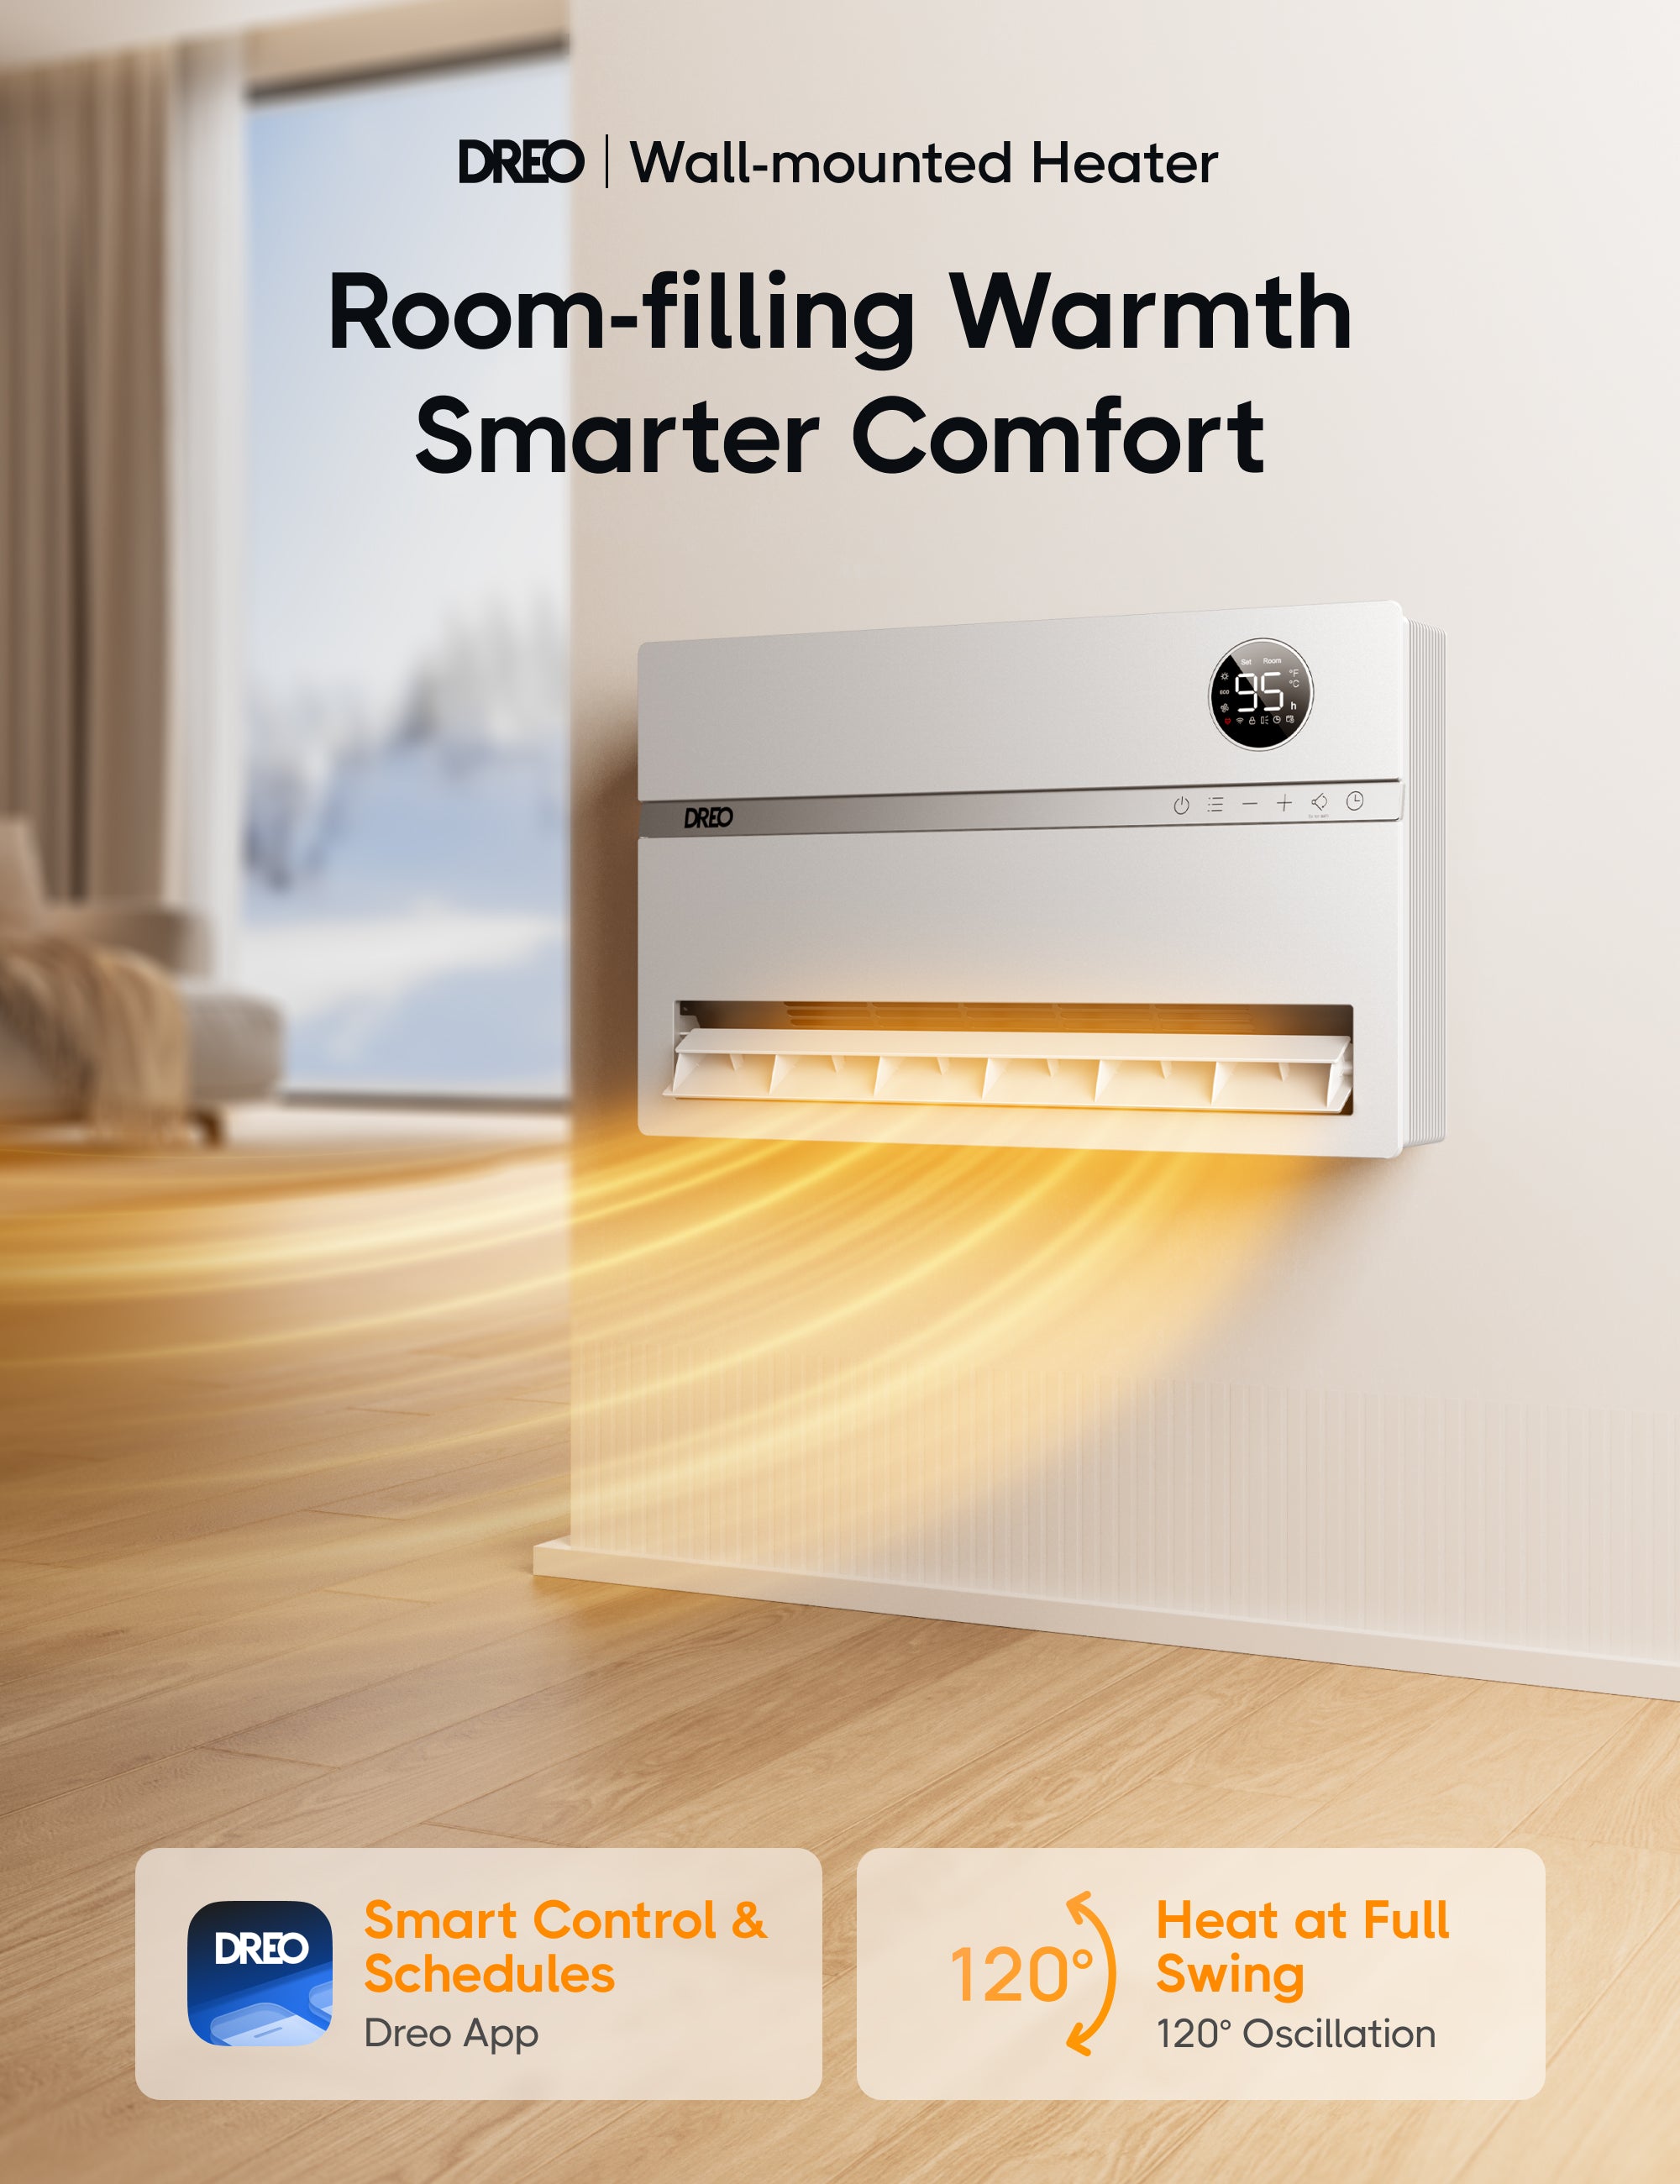 WH729S Smart Wall-mouted Heater